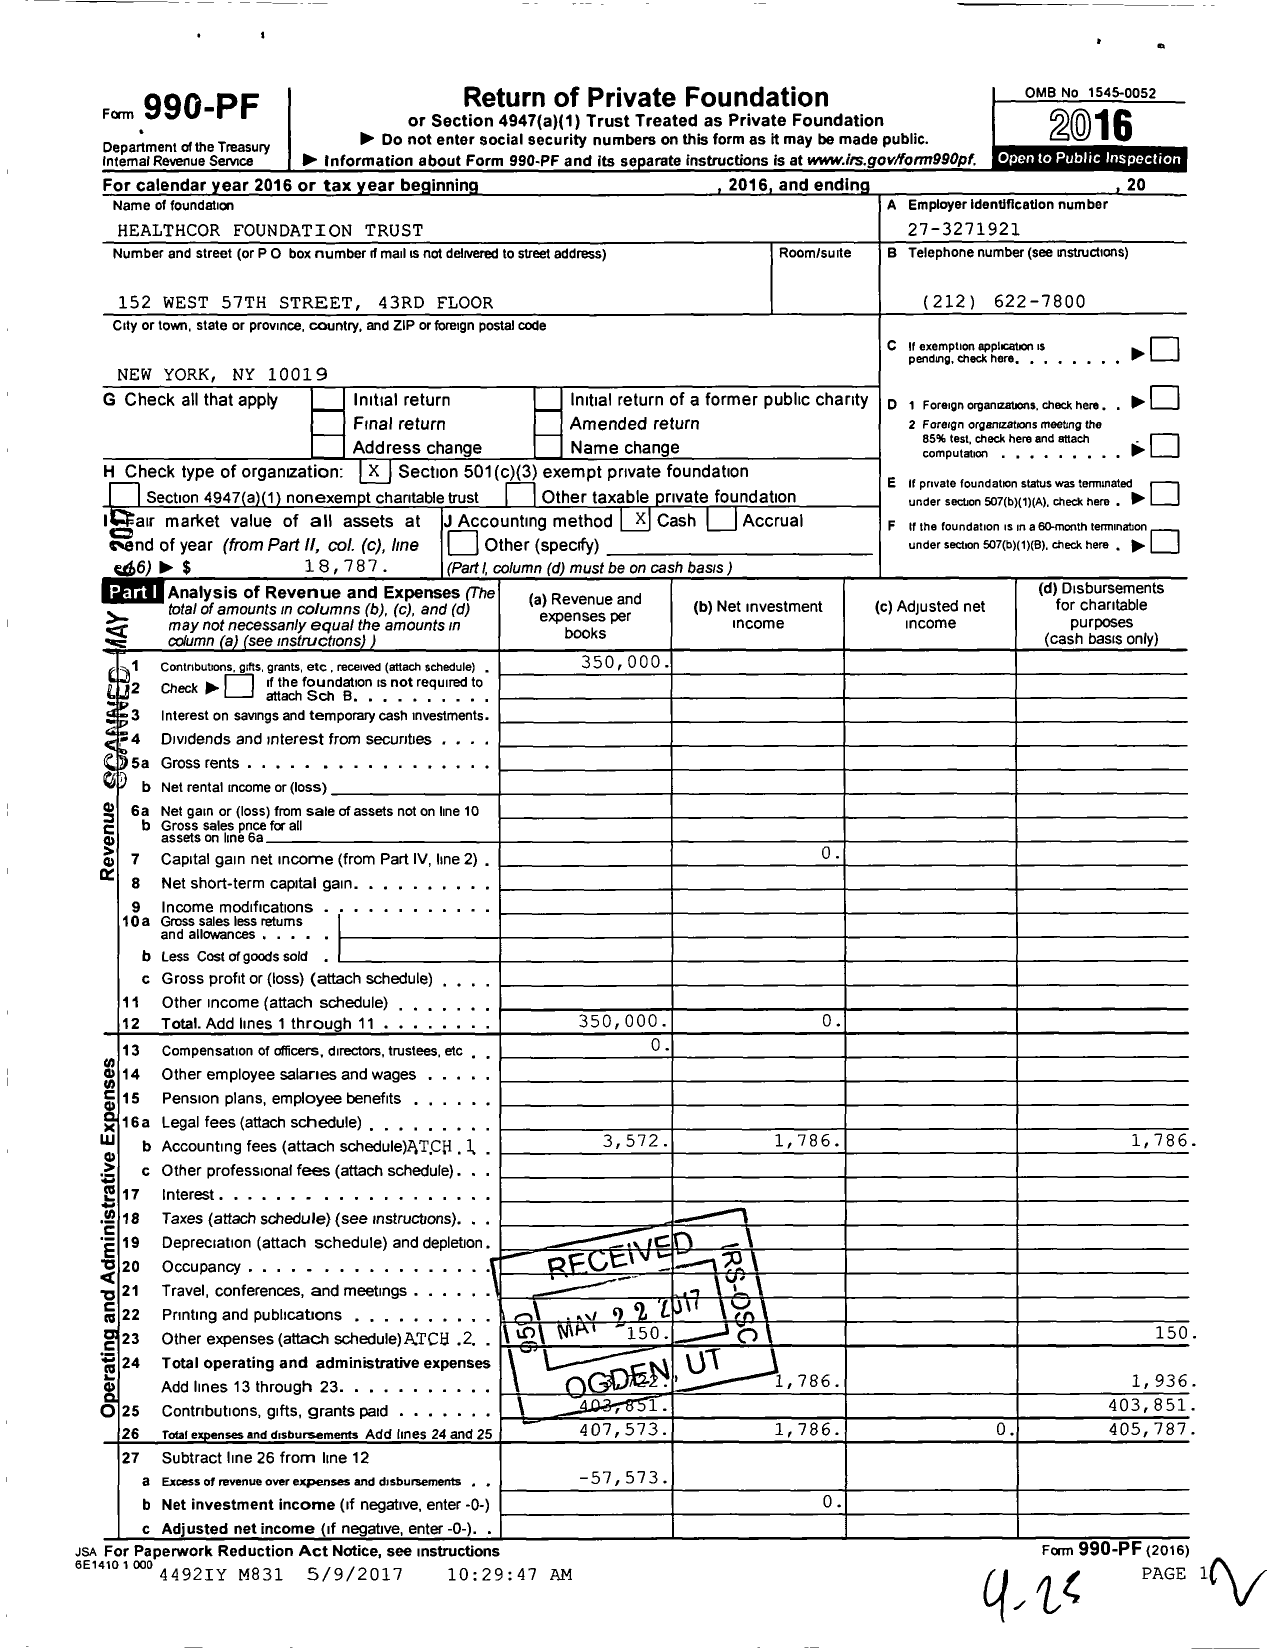 Image of first page of 2016 Form 990PF for Healthcor Foundation Trust